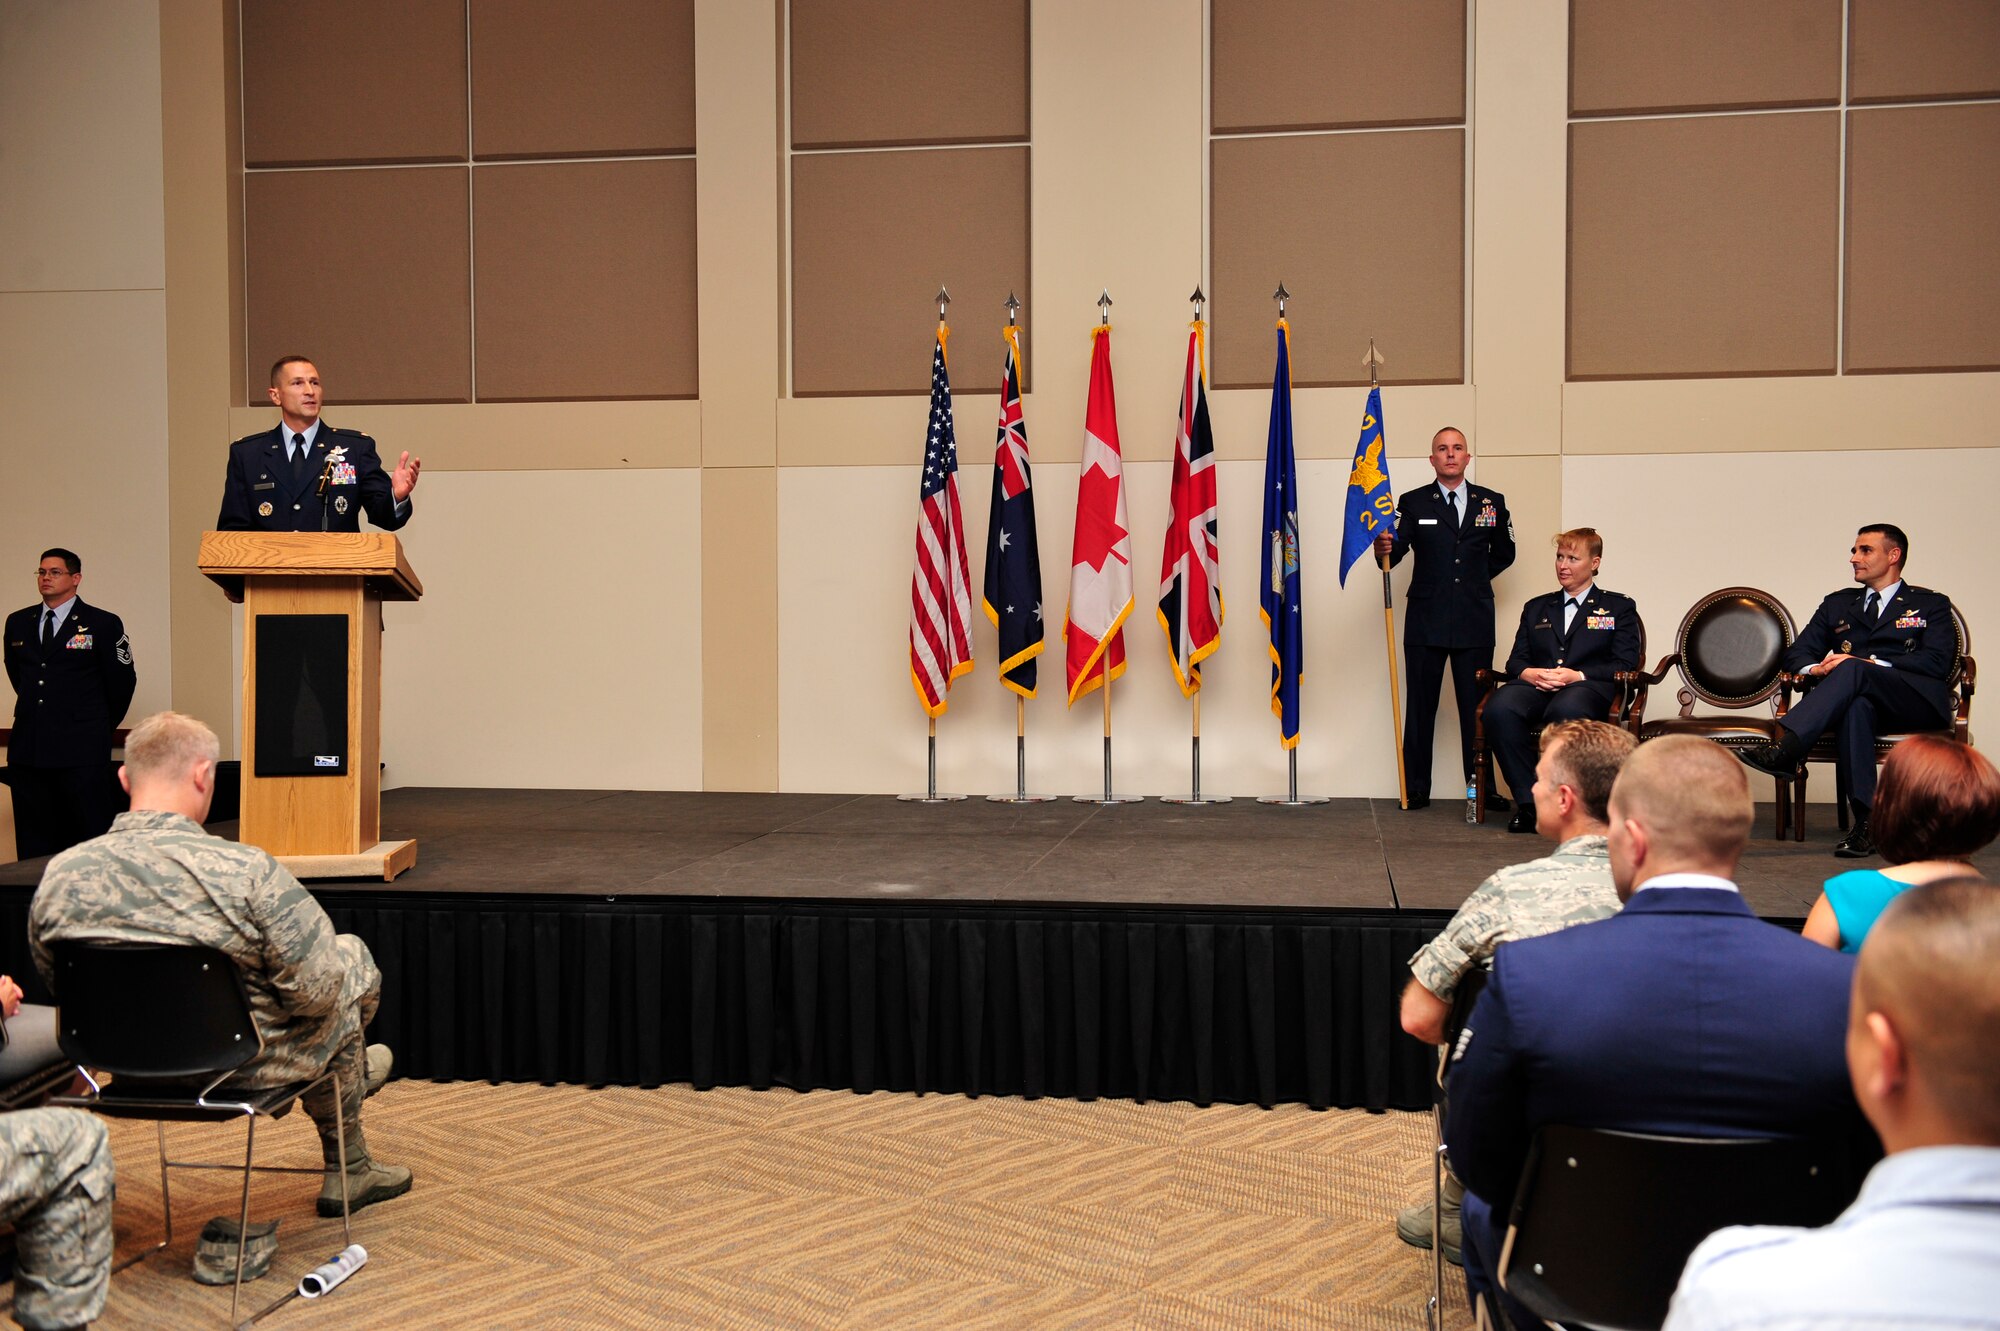 Lt. Col. Francois Roy, 2nd Space Warning Squadron commander, speaks to an audience about how honored he is to take command June 19, 2013, at the Leadership Development Center on Buckley Air Force Base, Colo. Roy arrived from the 11th Space Warning Squadron, Schriever AFB, Colo. (U.S. Air Force photo by Airman 1st Class Darryl Bolden Jr./Released)